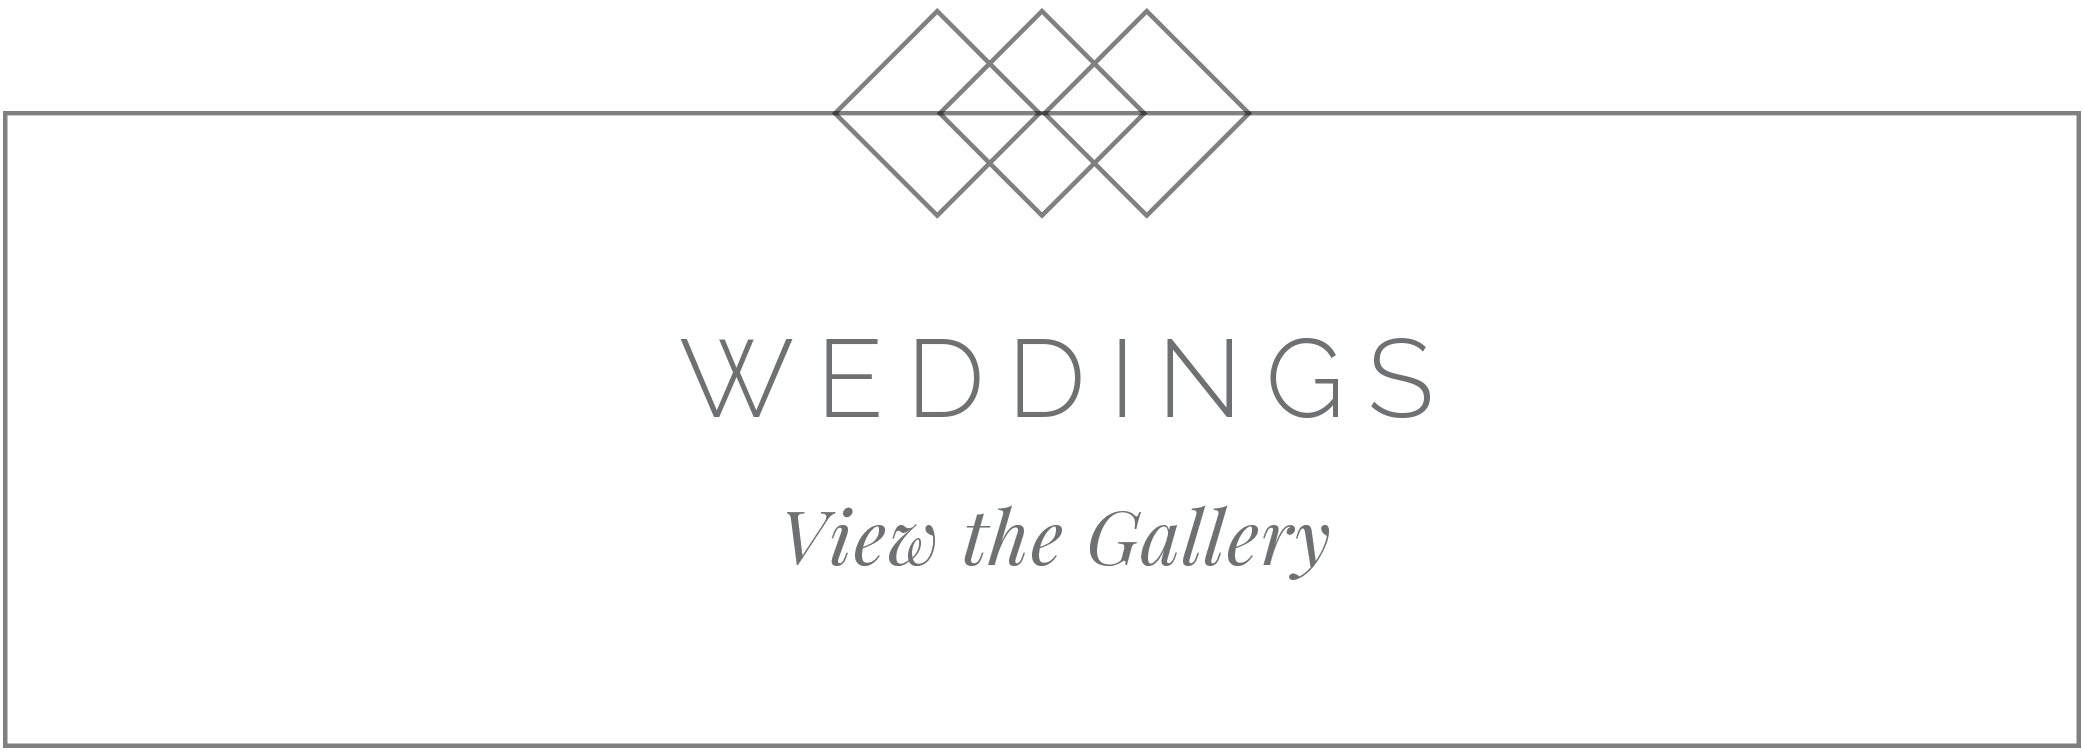 weddinggallerybutton.png